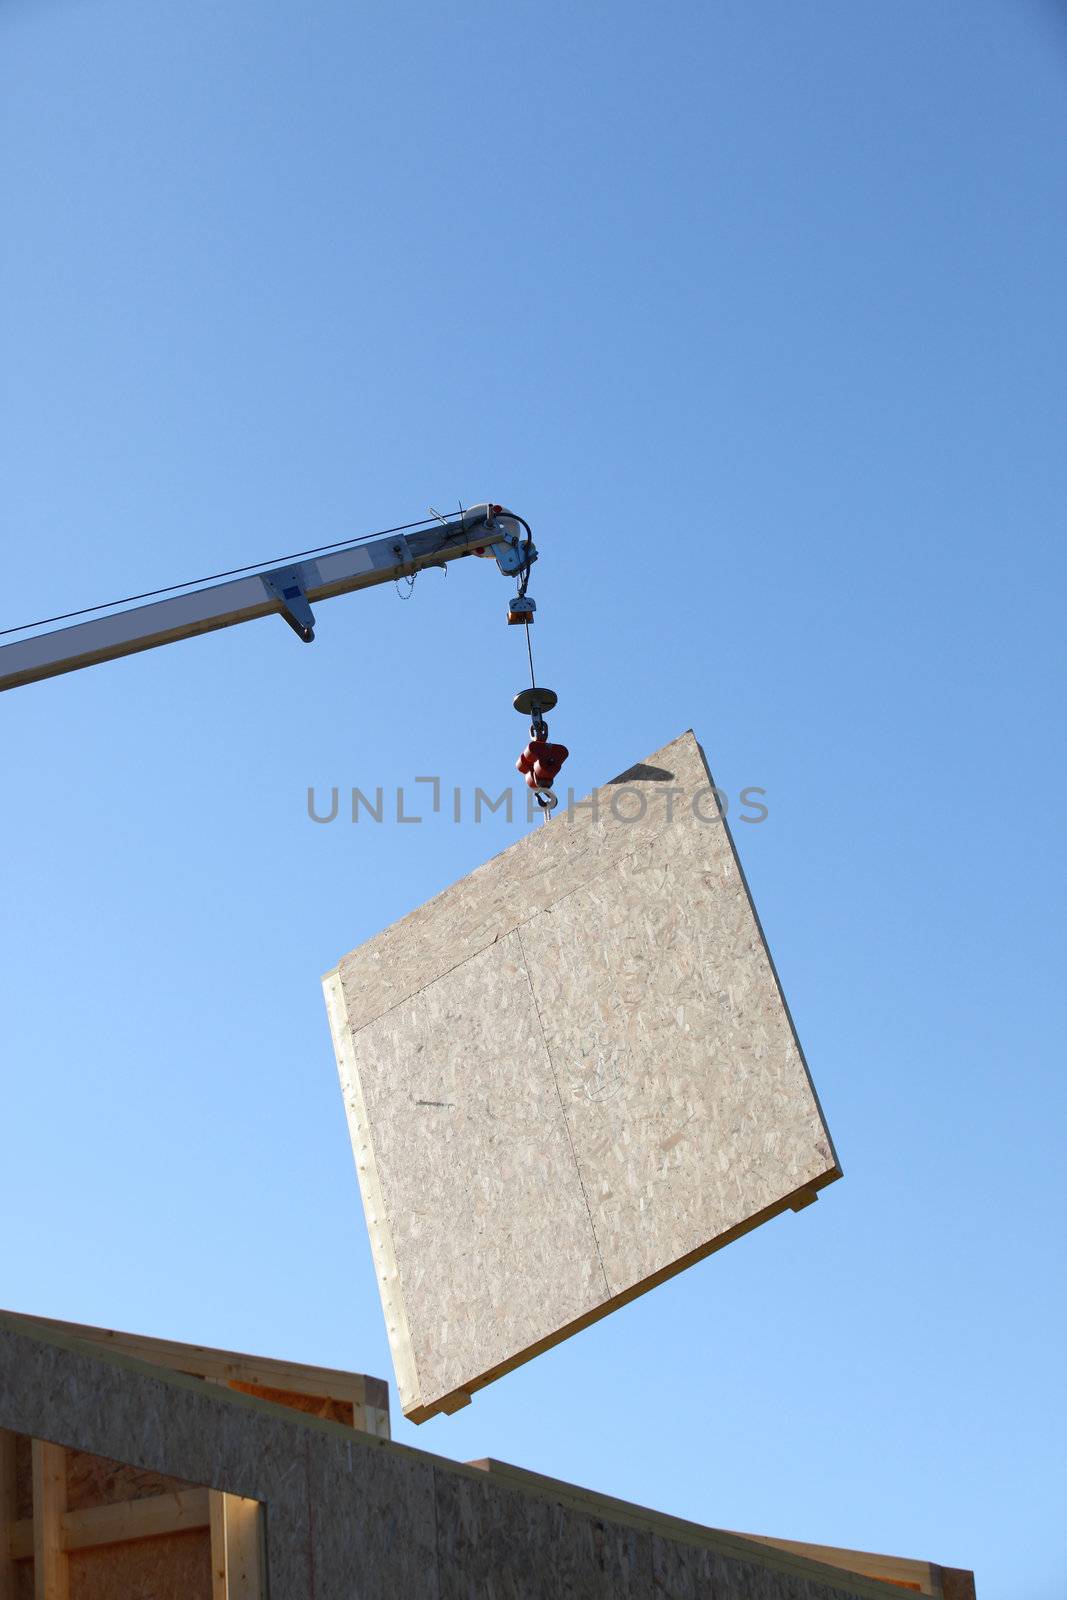 Wooden panel being lifted by crane